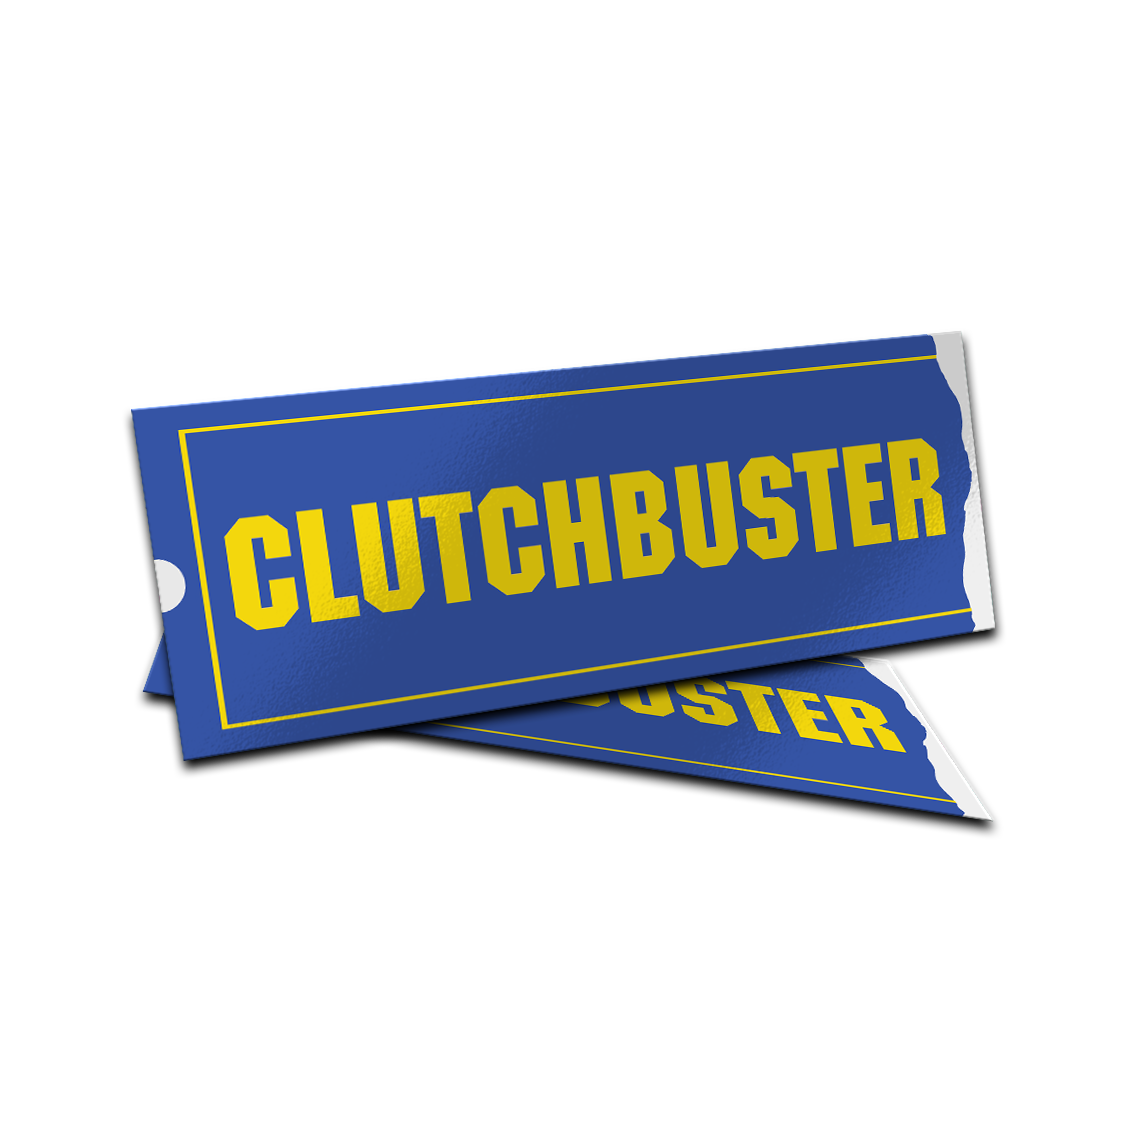 Clutchbuster